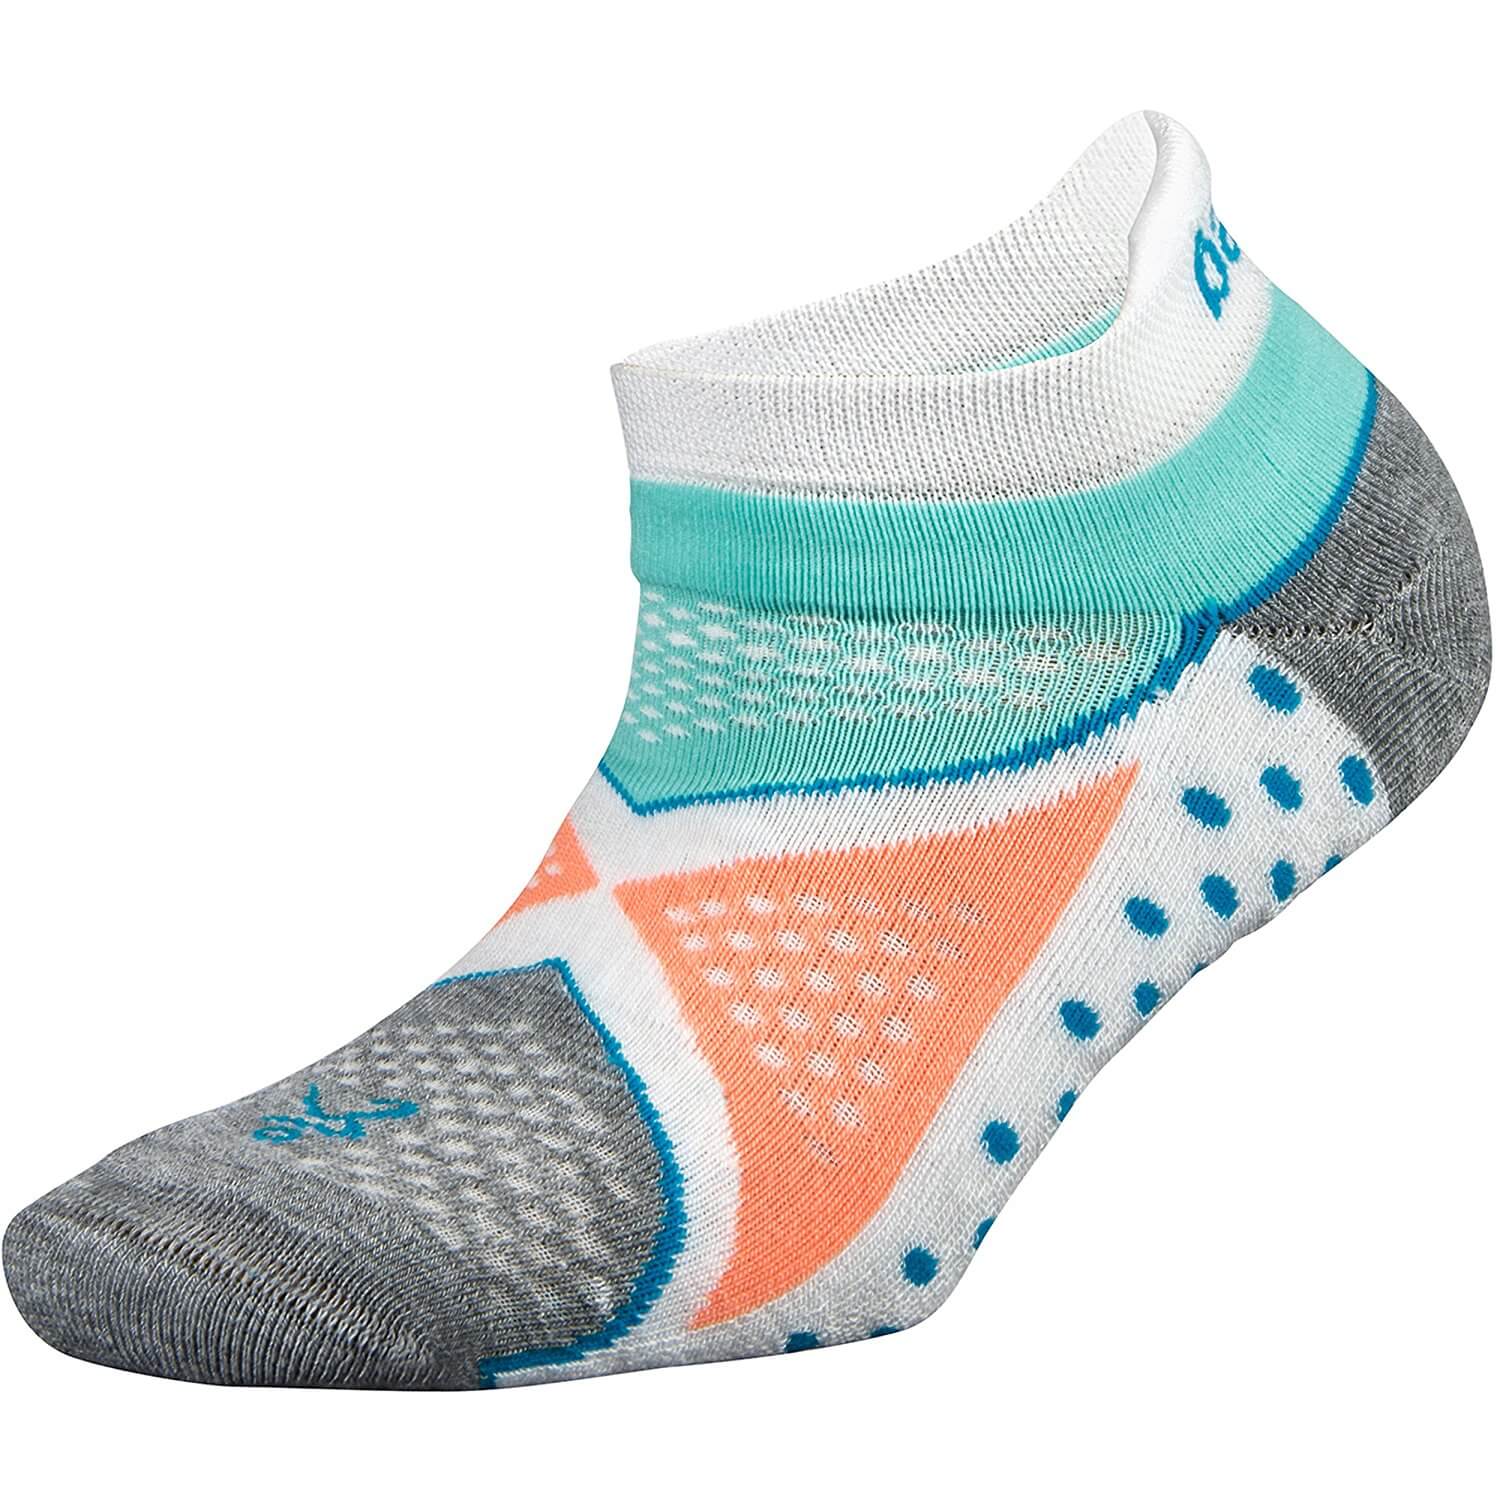 Best Trainer Socks Reviewed & Fully Compared | RunnerClick